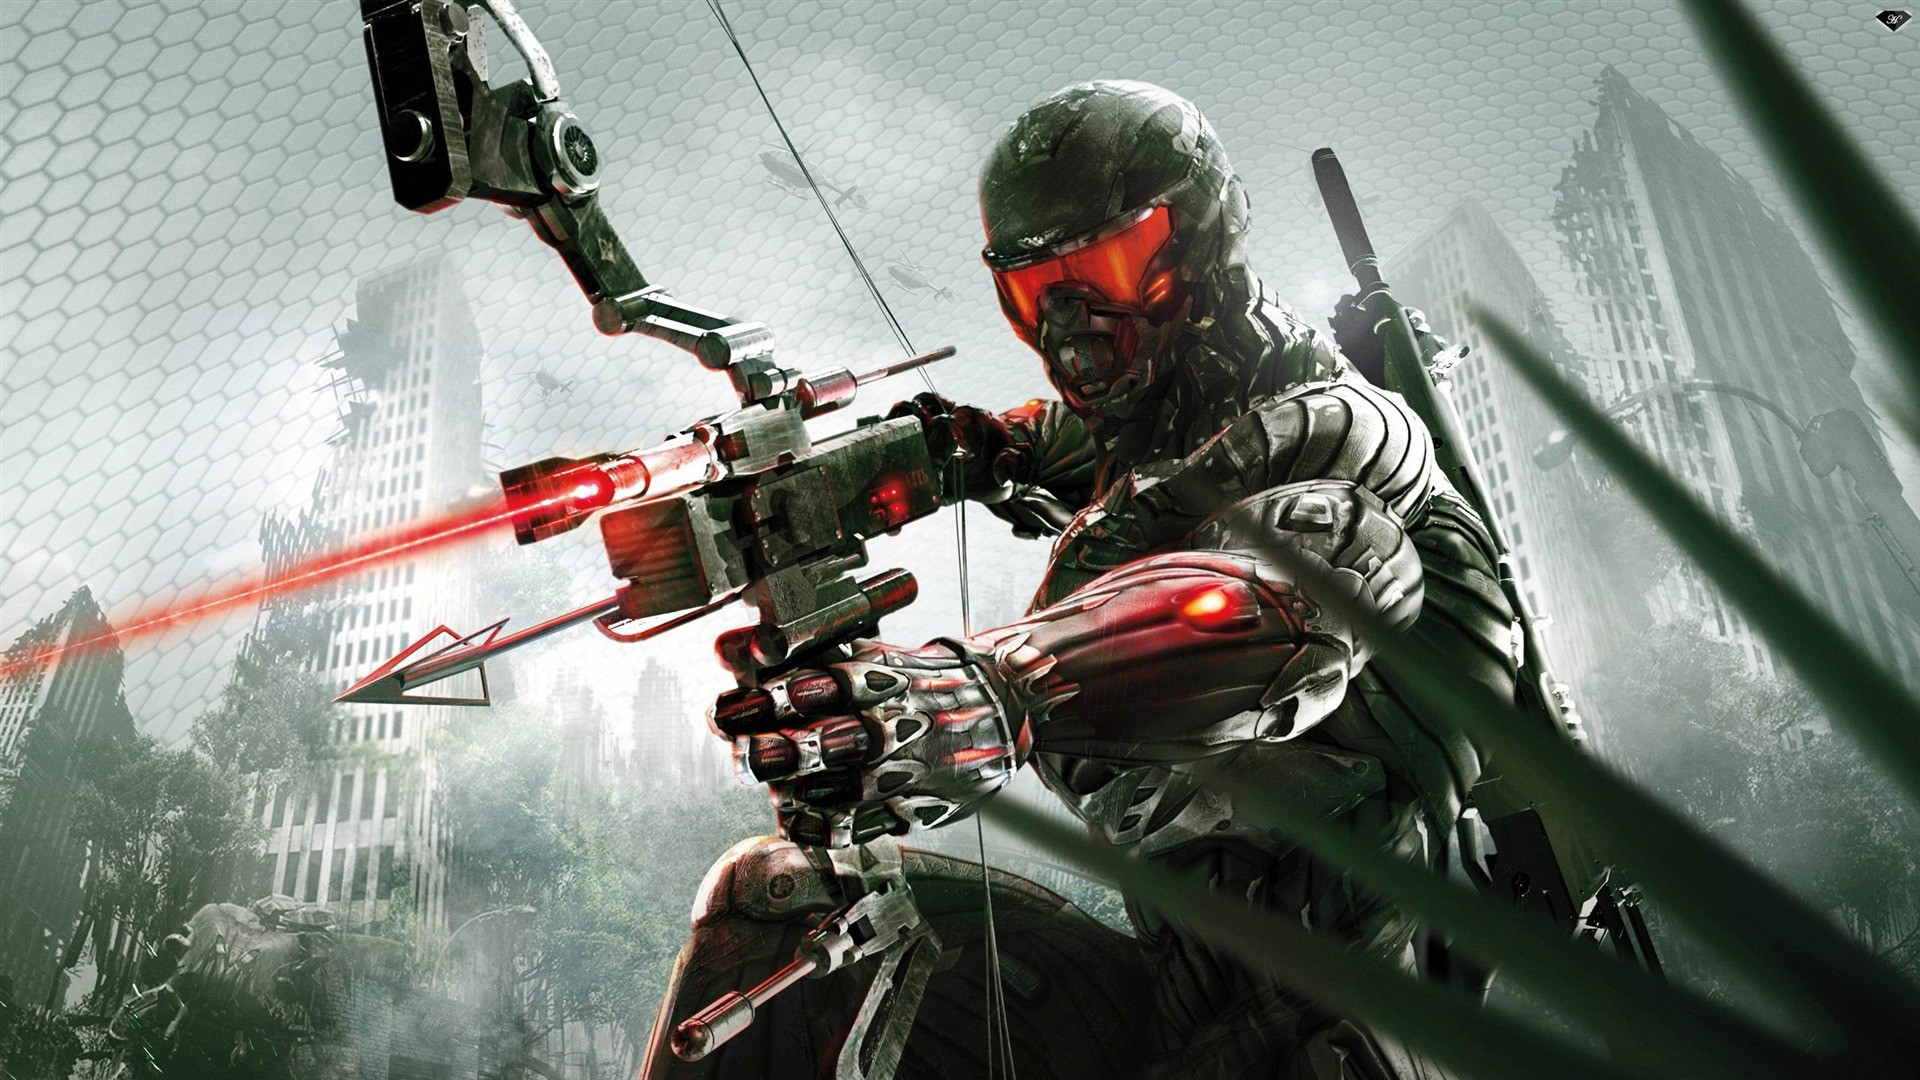 General 1920x1080 Crysis 3 video games bow video game art science fiction weapon